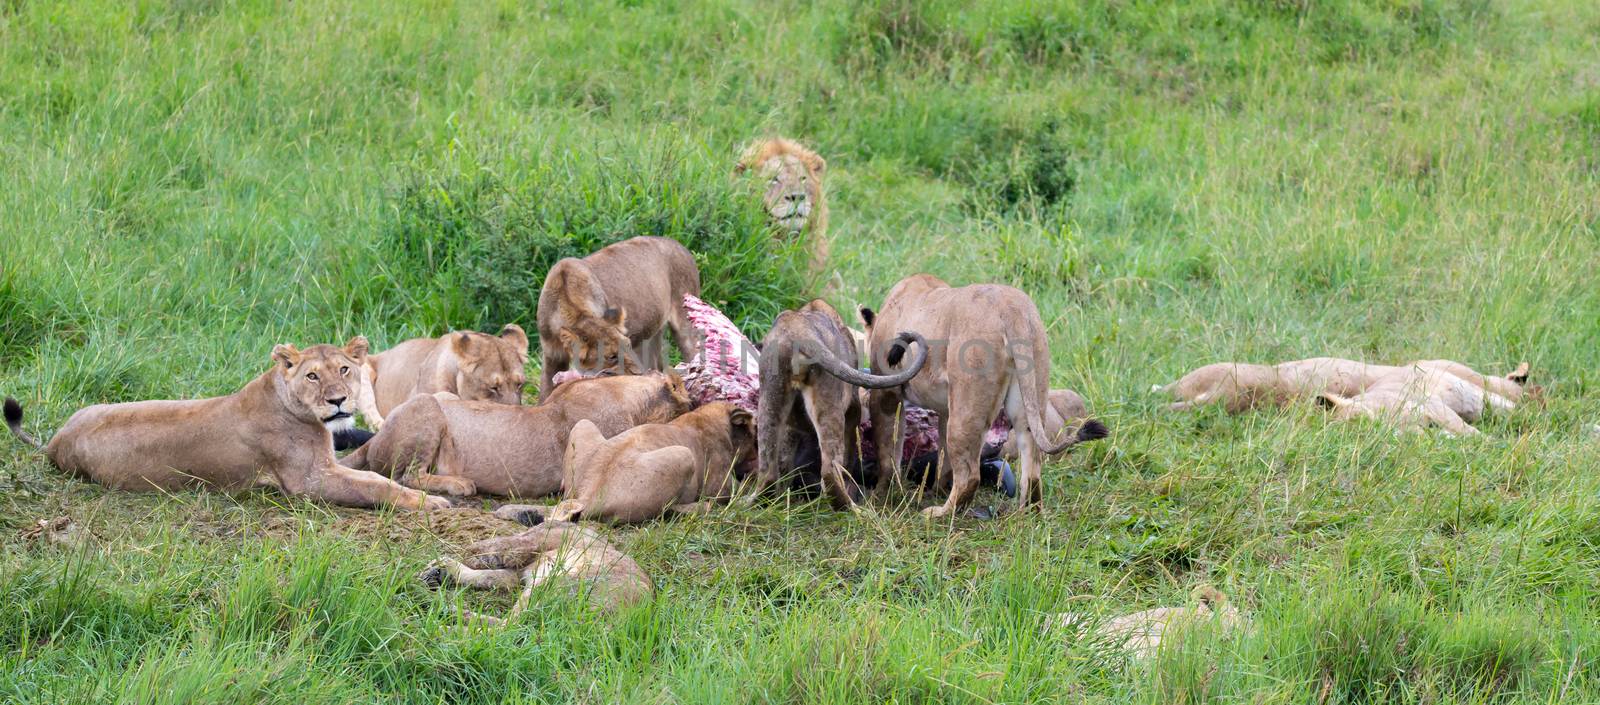 A lion family is eating a buffalo between tall grass by 25ehaag6